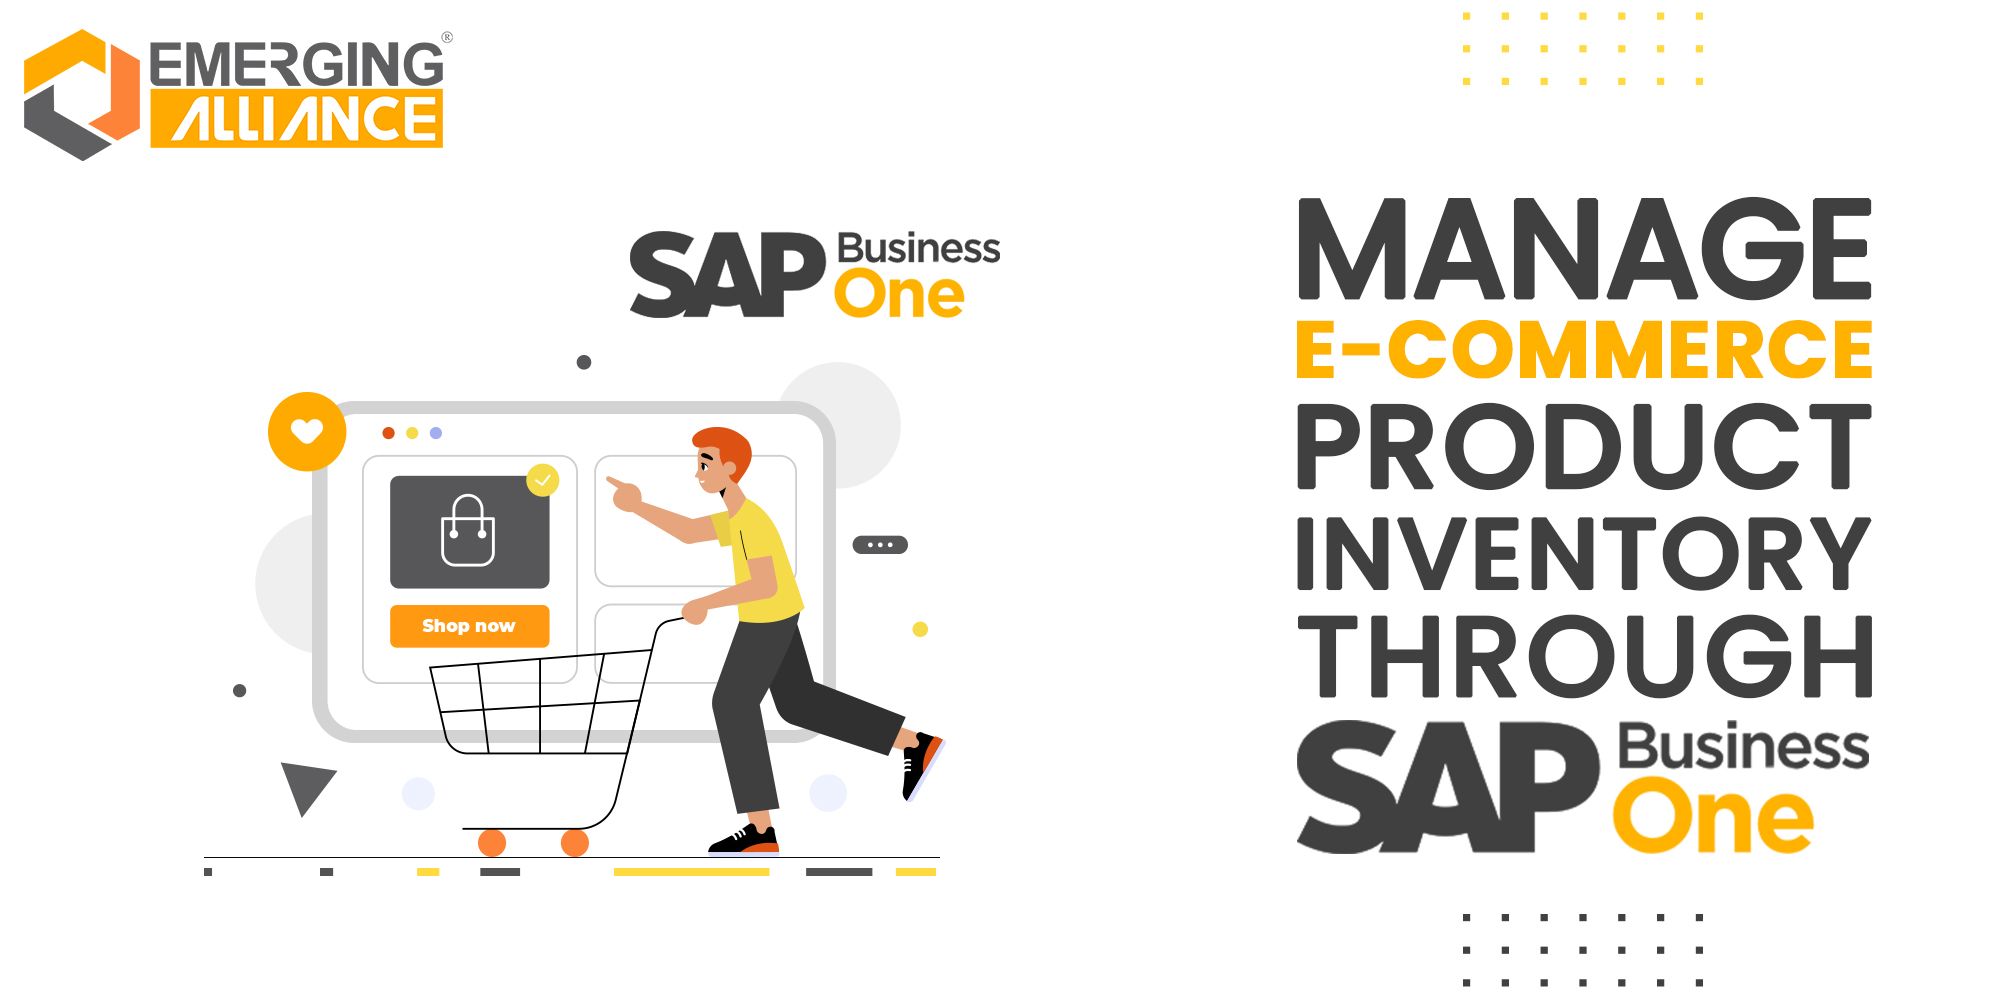 MANAGE E-COMMERCE PRODUCT INVENTORY THROUGH SAP BUSINESS ONE